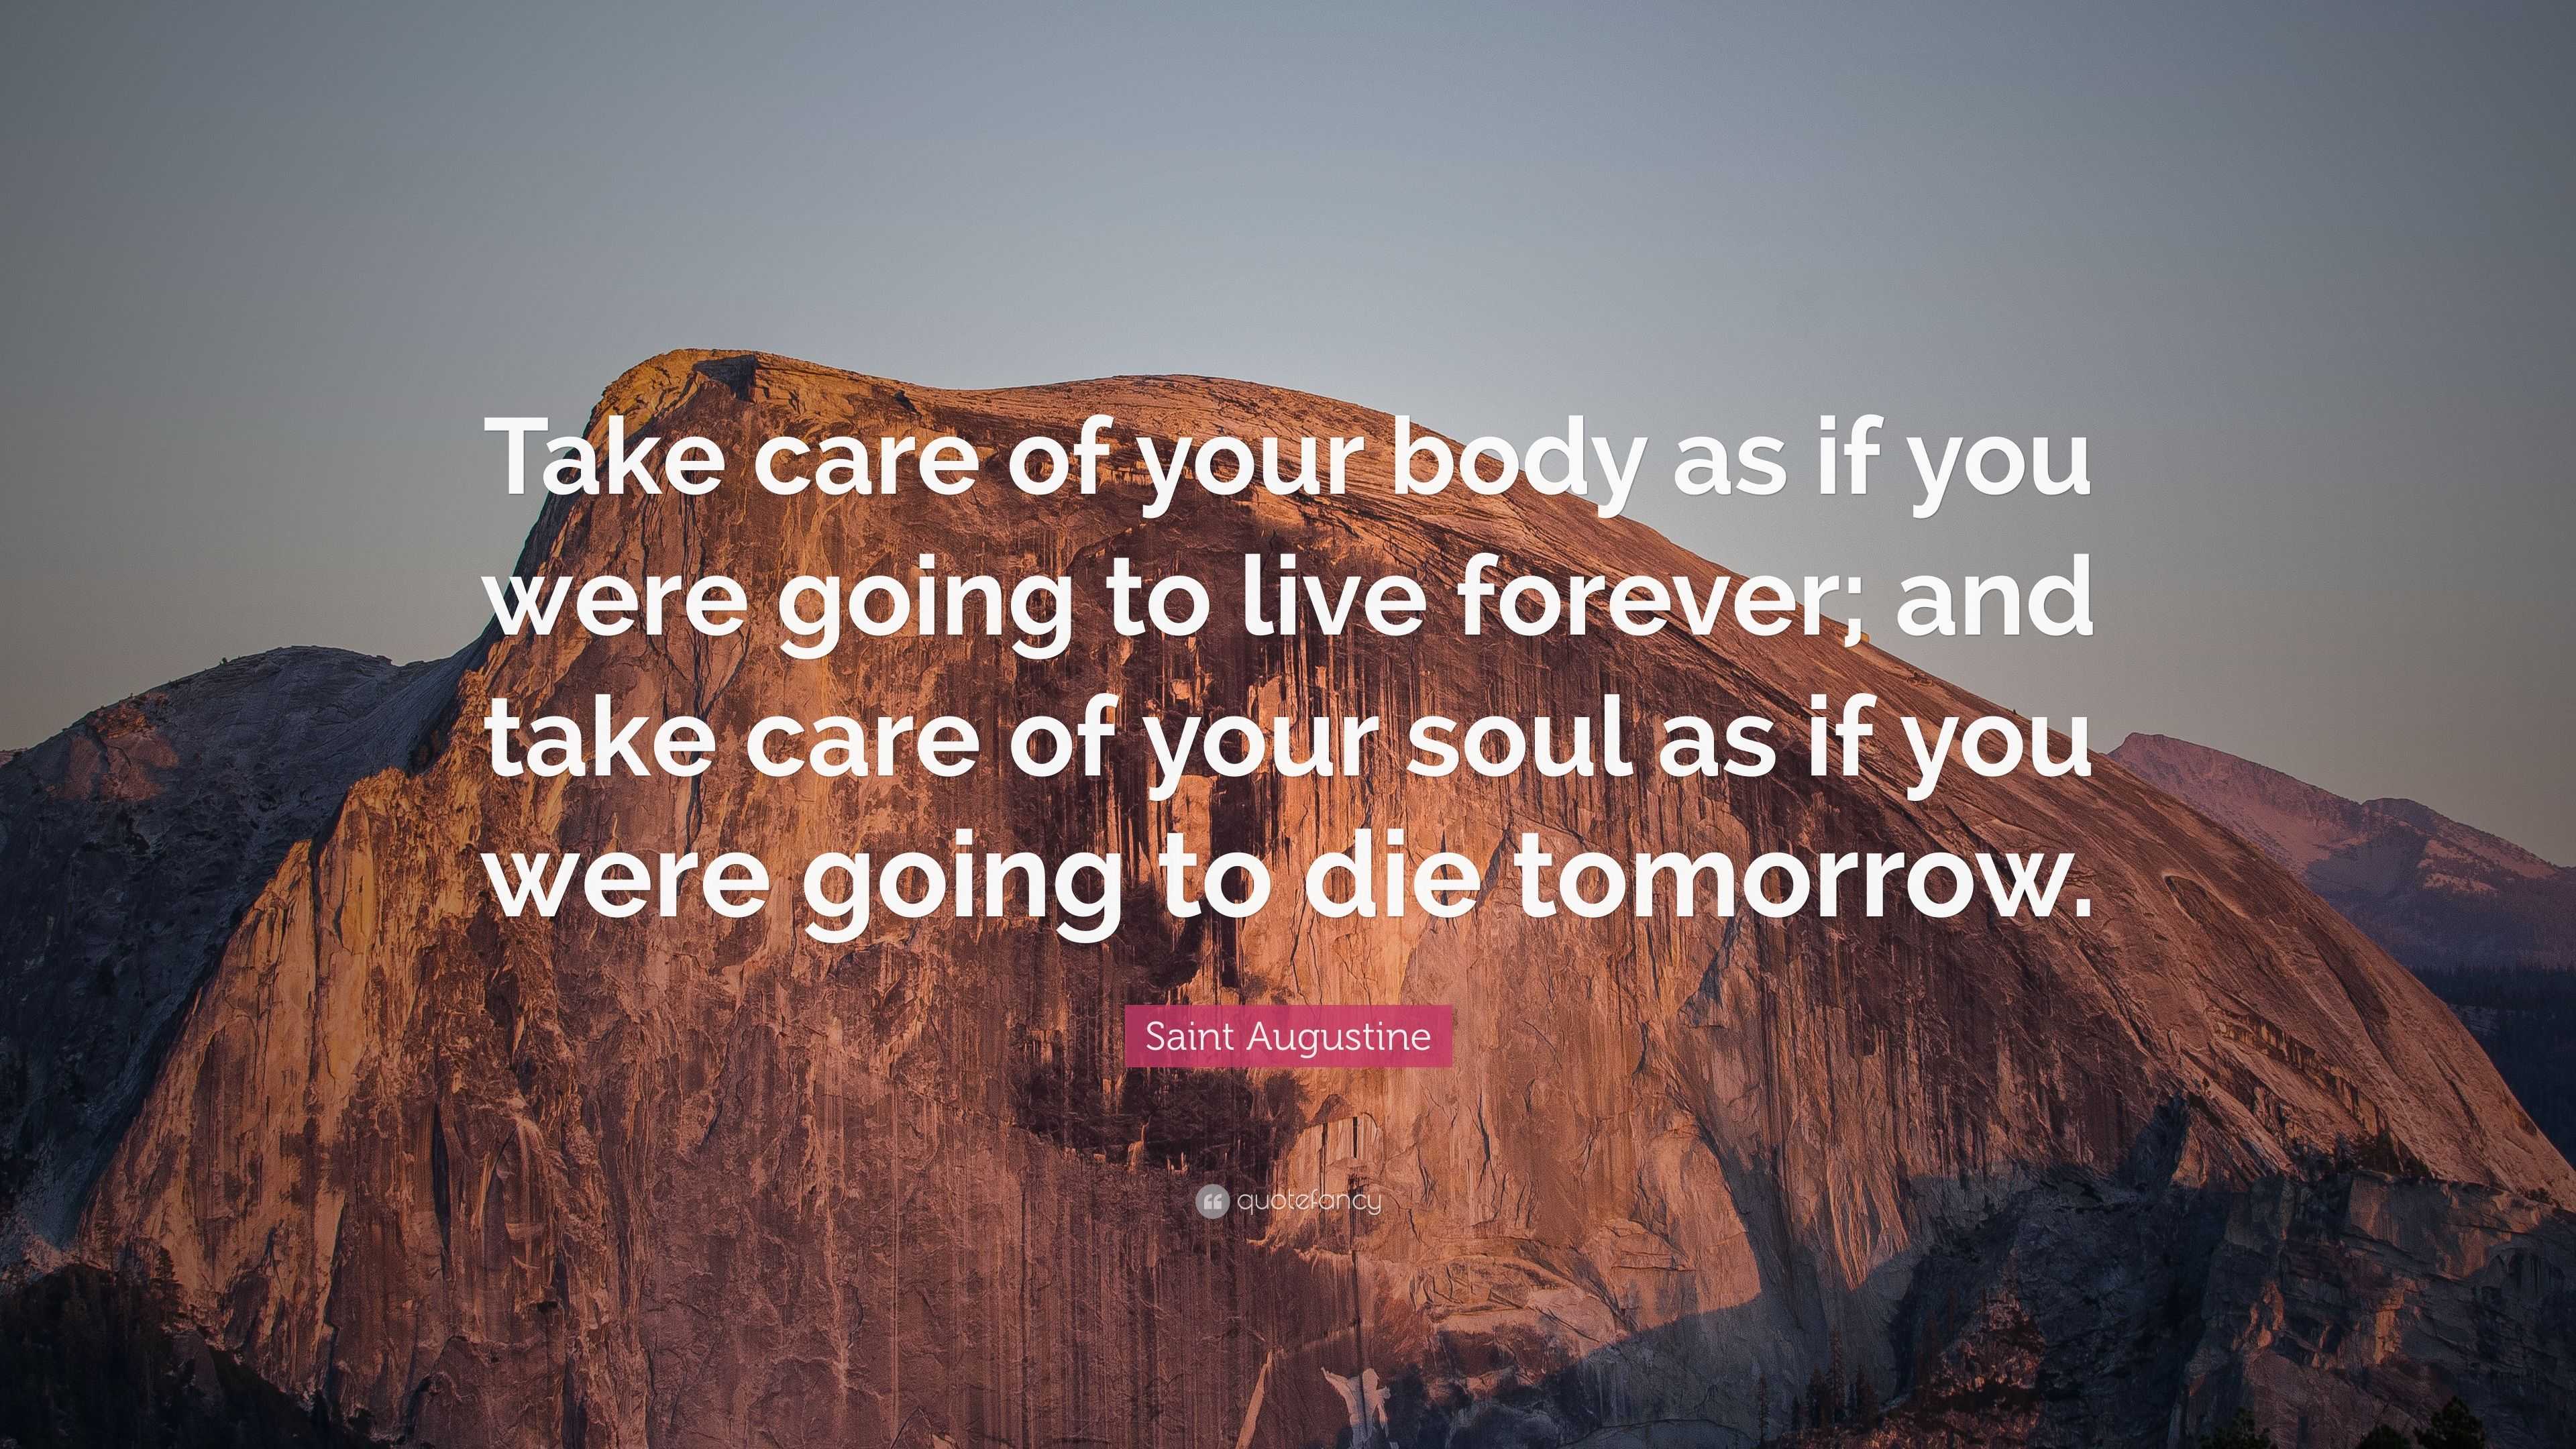 Saint Augustine Quote Take Care Of Your Body As If You Were Going To Live Forever And Take Care Of Your Soul As If You Were Going To Die Tomo